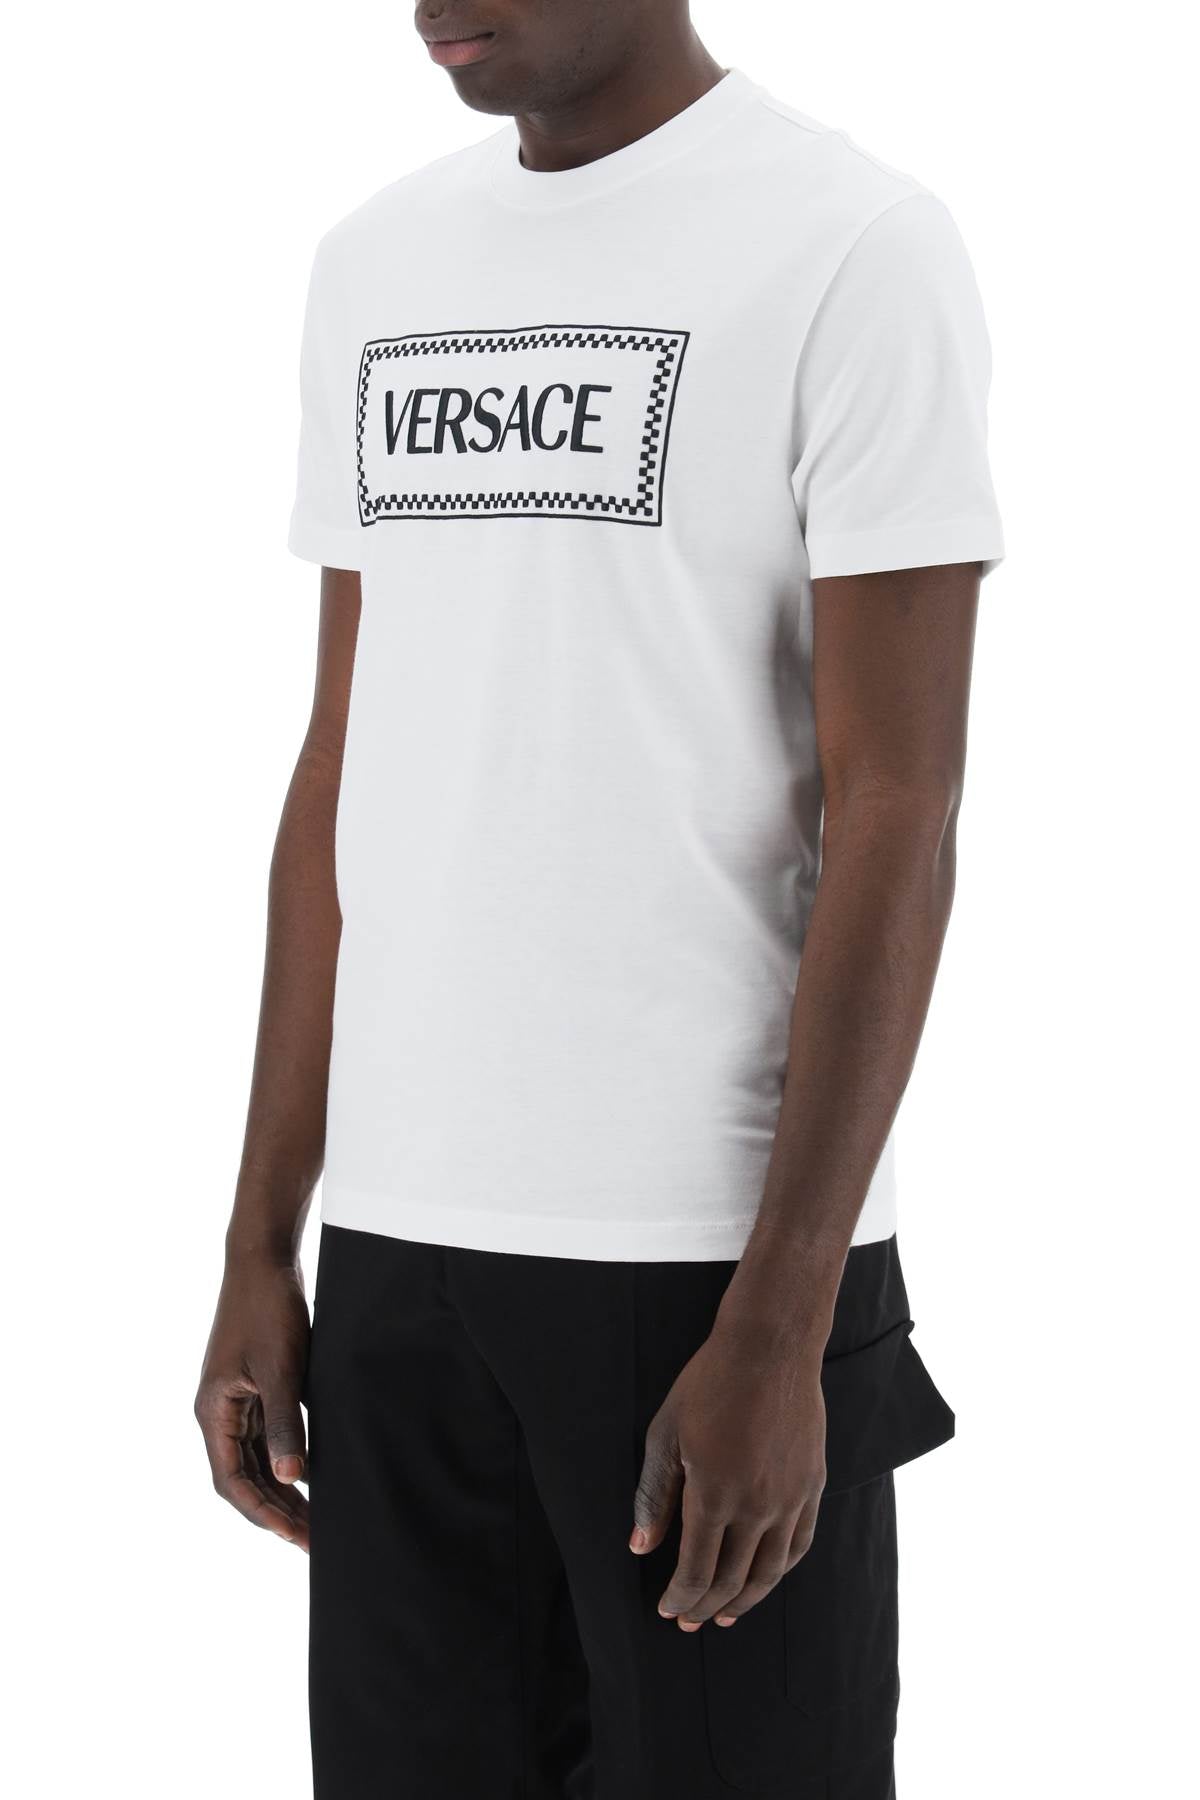 Versace embroidered logo t-shirt